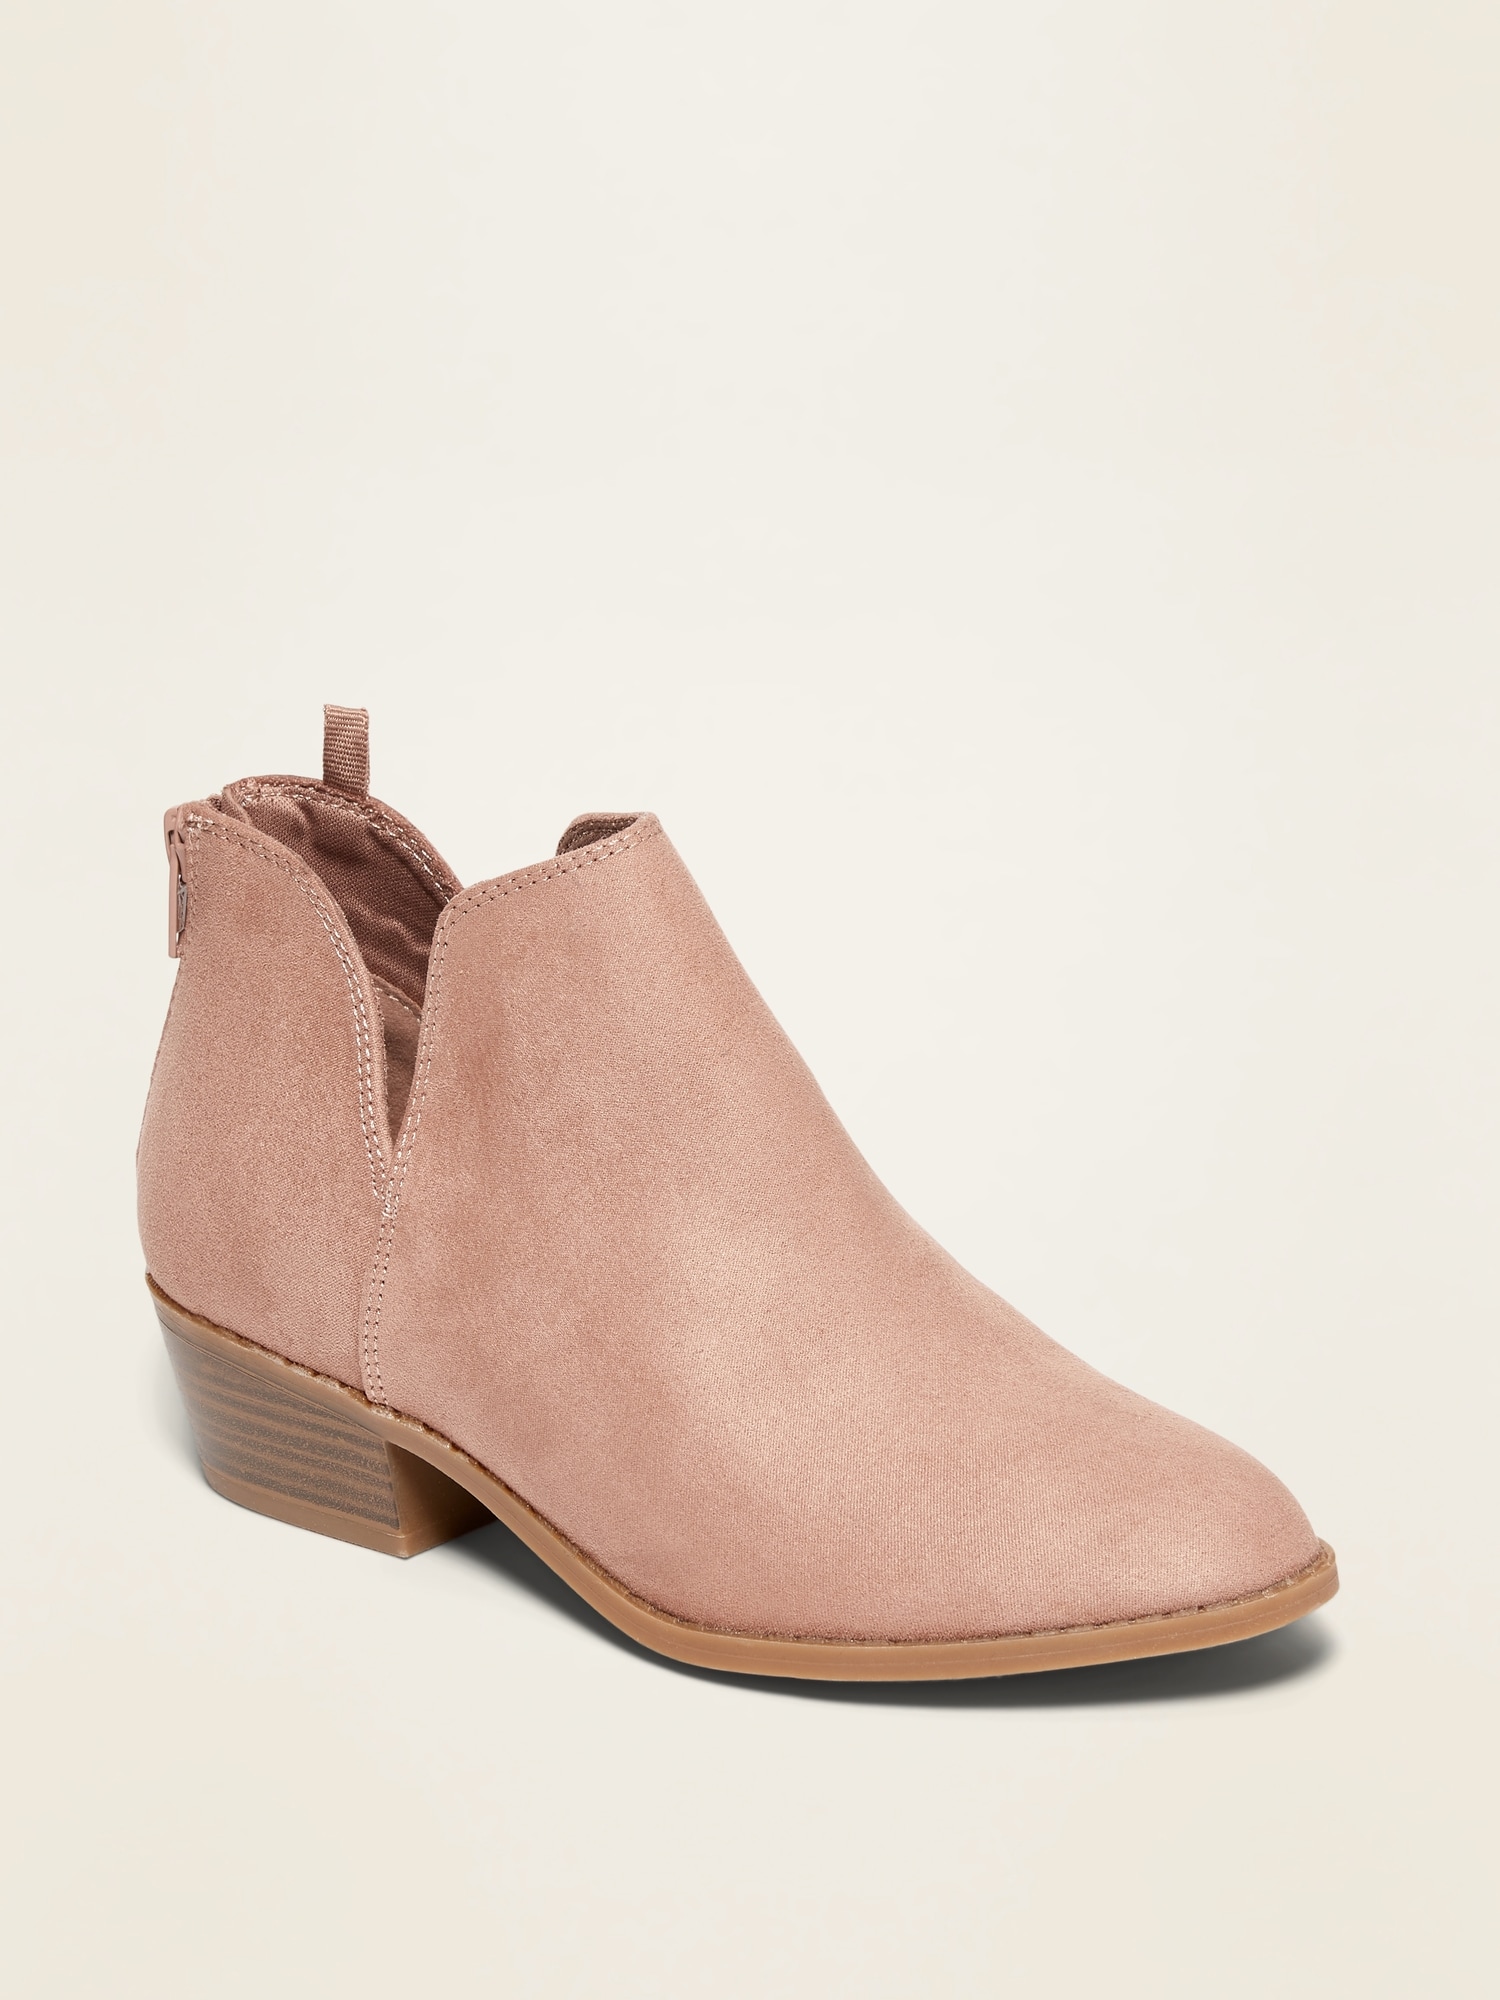 suede cut out booties